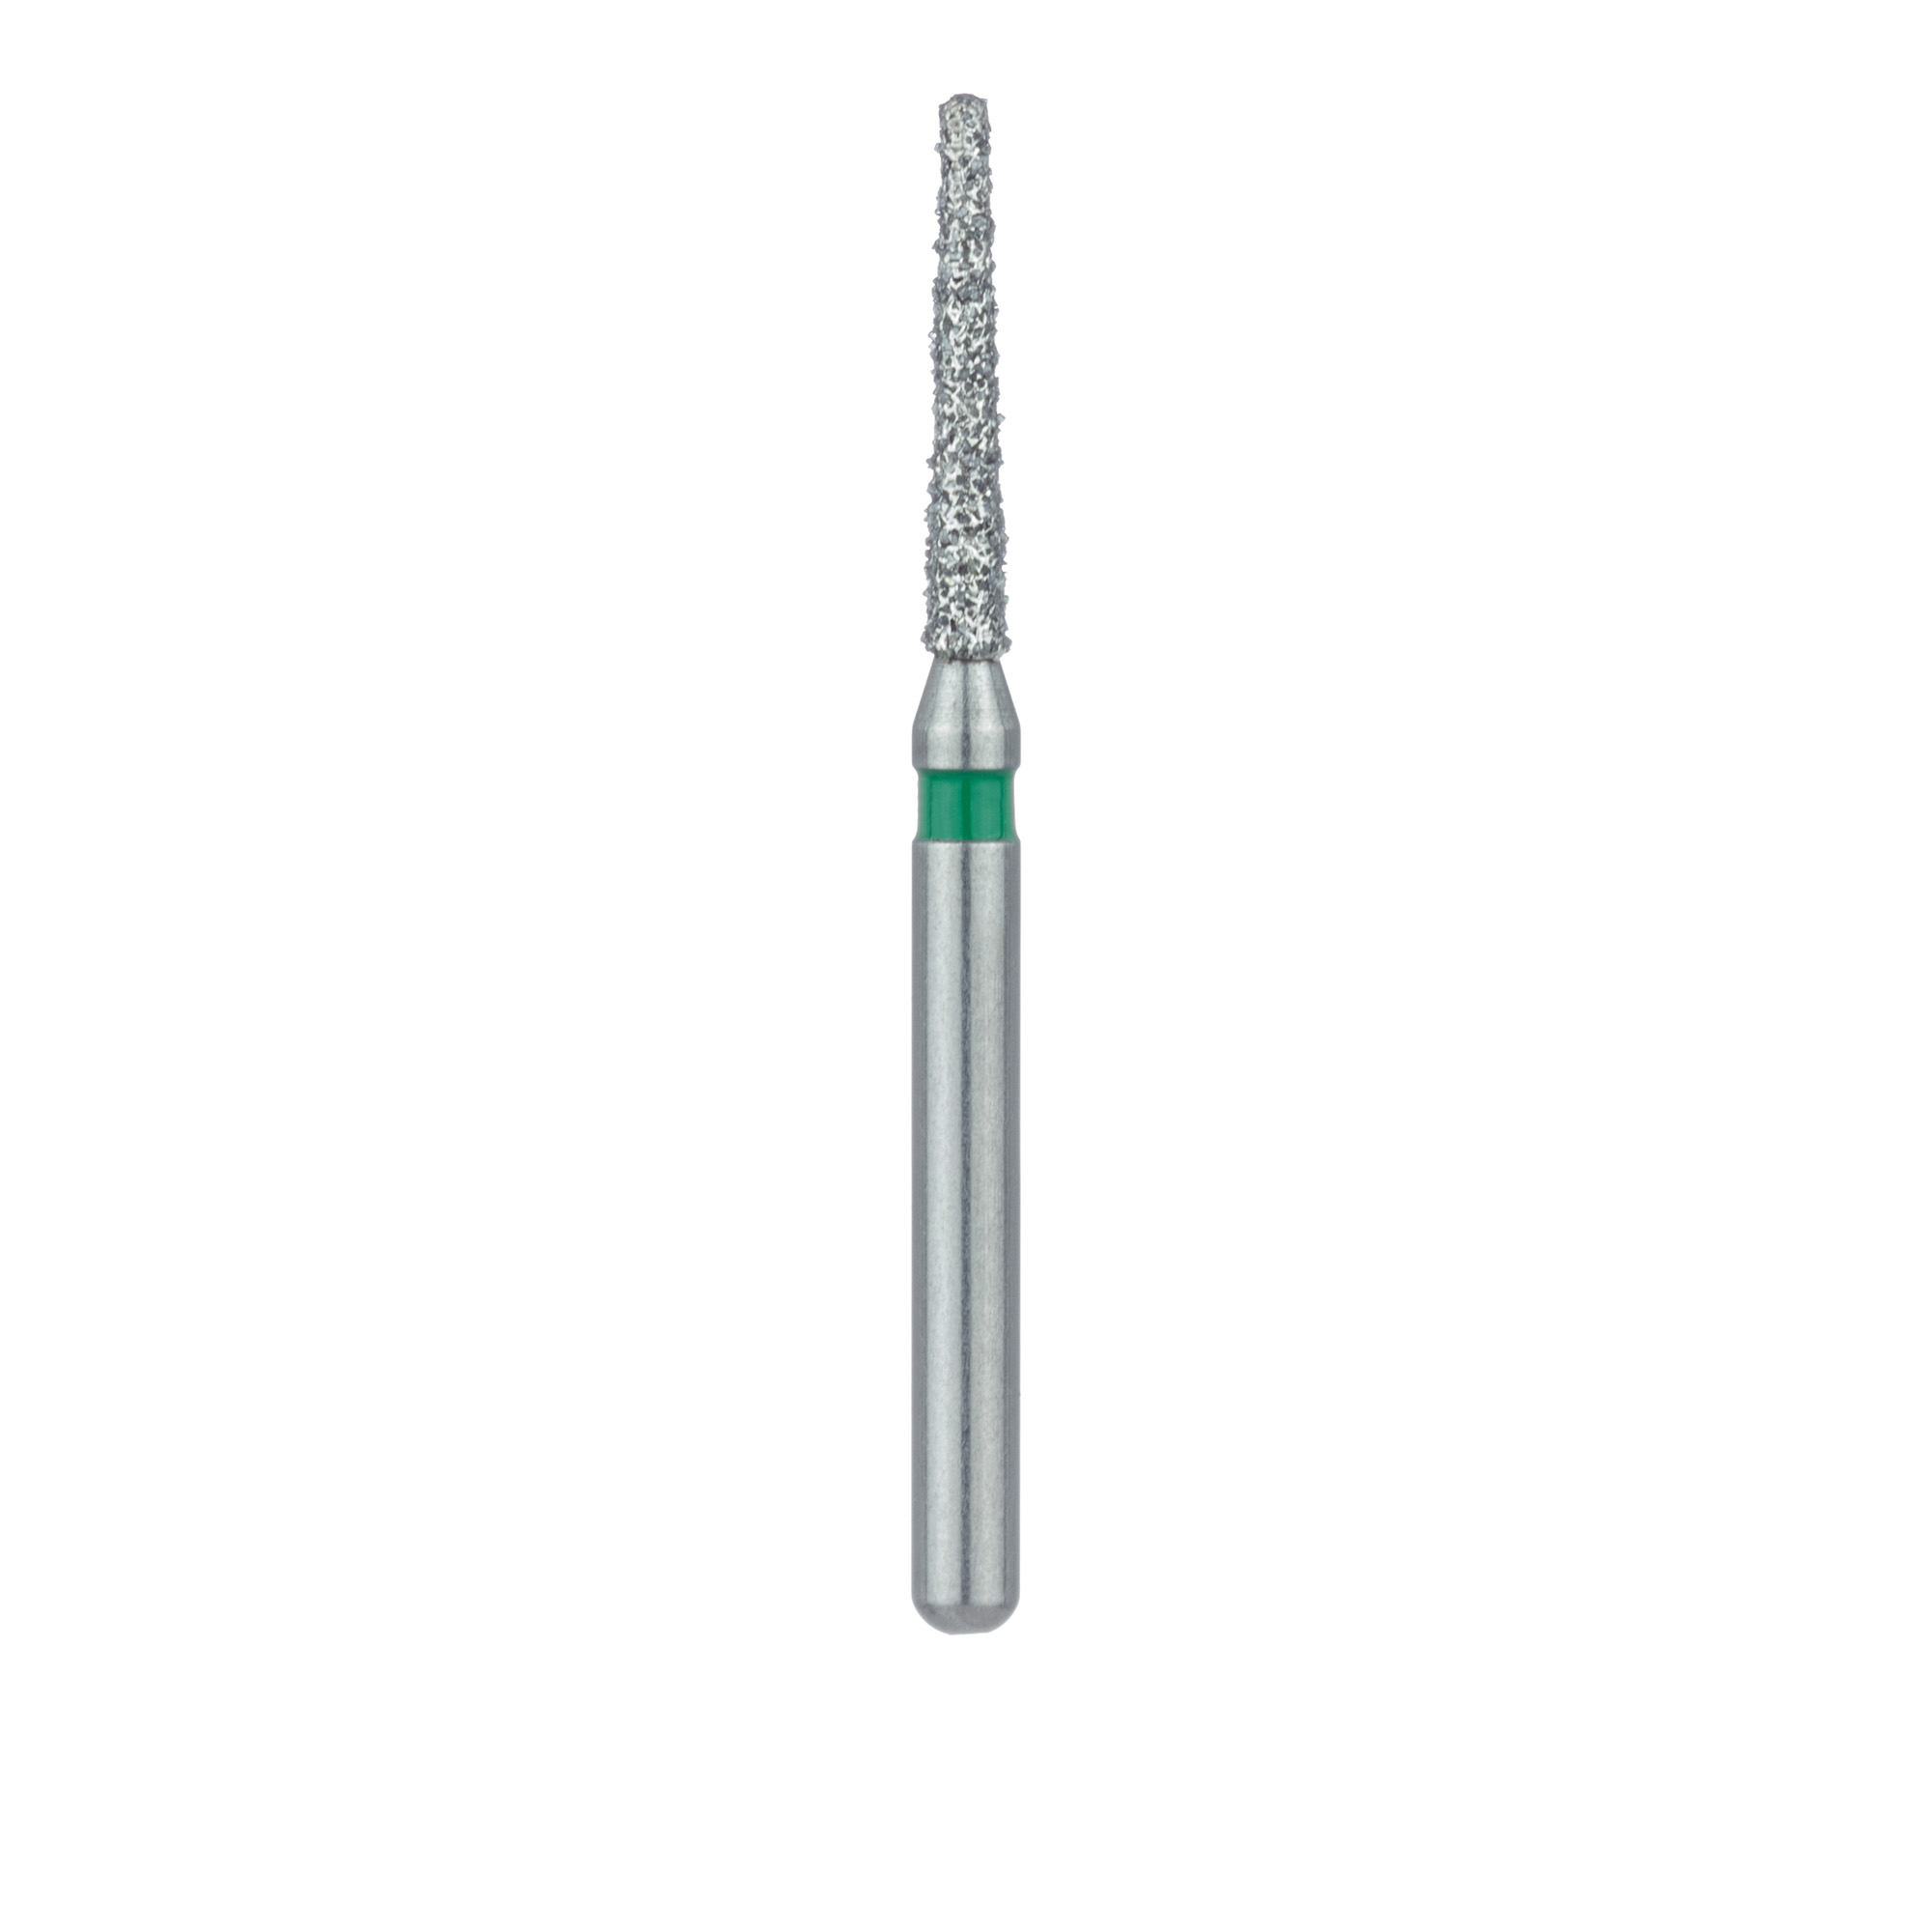 1112.7C Single-Use Diamond Bur, Sterile, 25 Pack, 1.2mm Ø, Tapered, Round End, 7mm Working Length, Coarse, FG